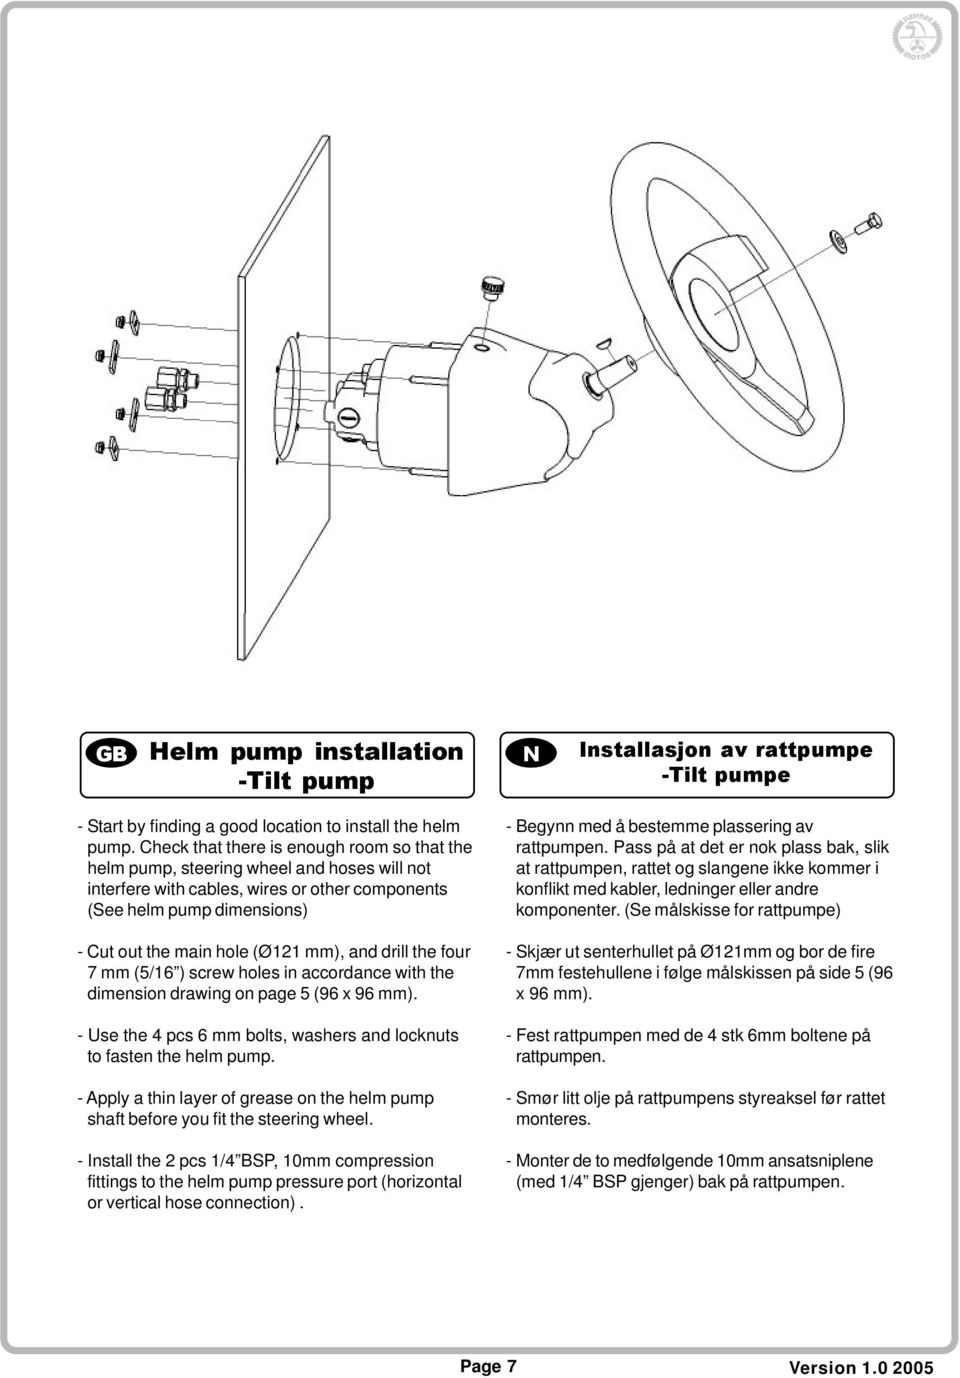 and drill the four 7 mm (5/16 ) screw holes in accordance with the dimension drawing on page 5 (96 x 96 mm). - Use the 4 pcs 6 mm bolts, washers and locknuts to fasten the helm pump.